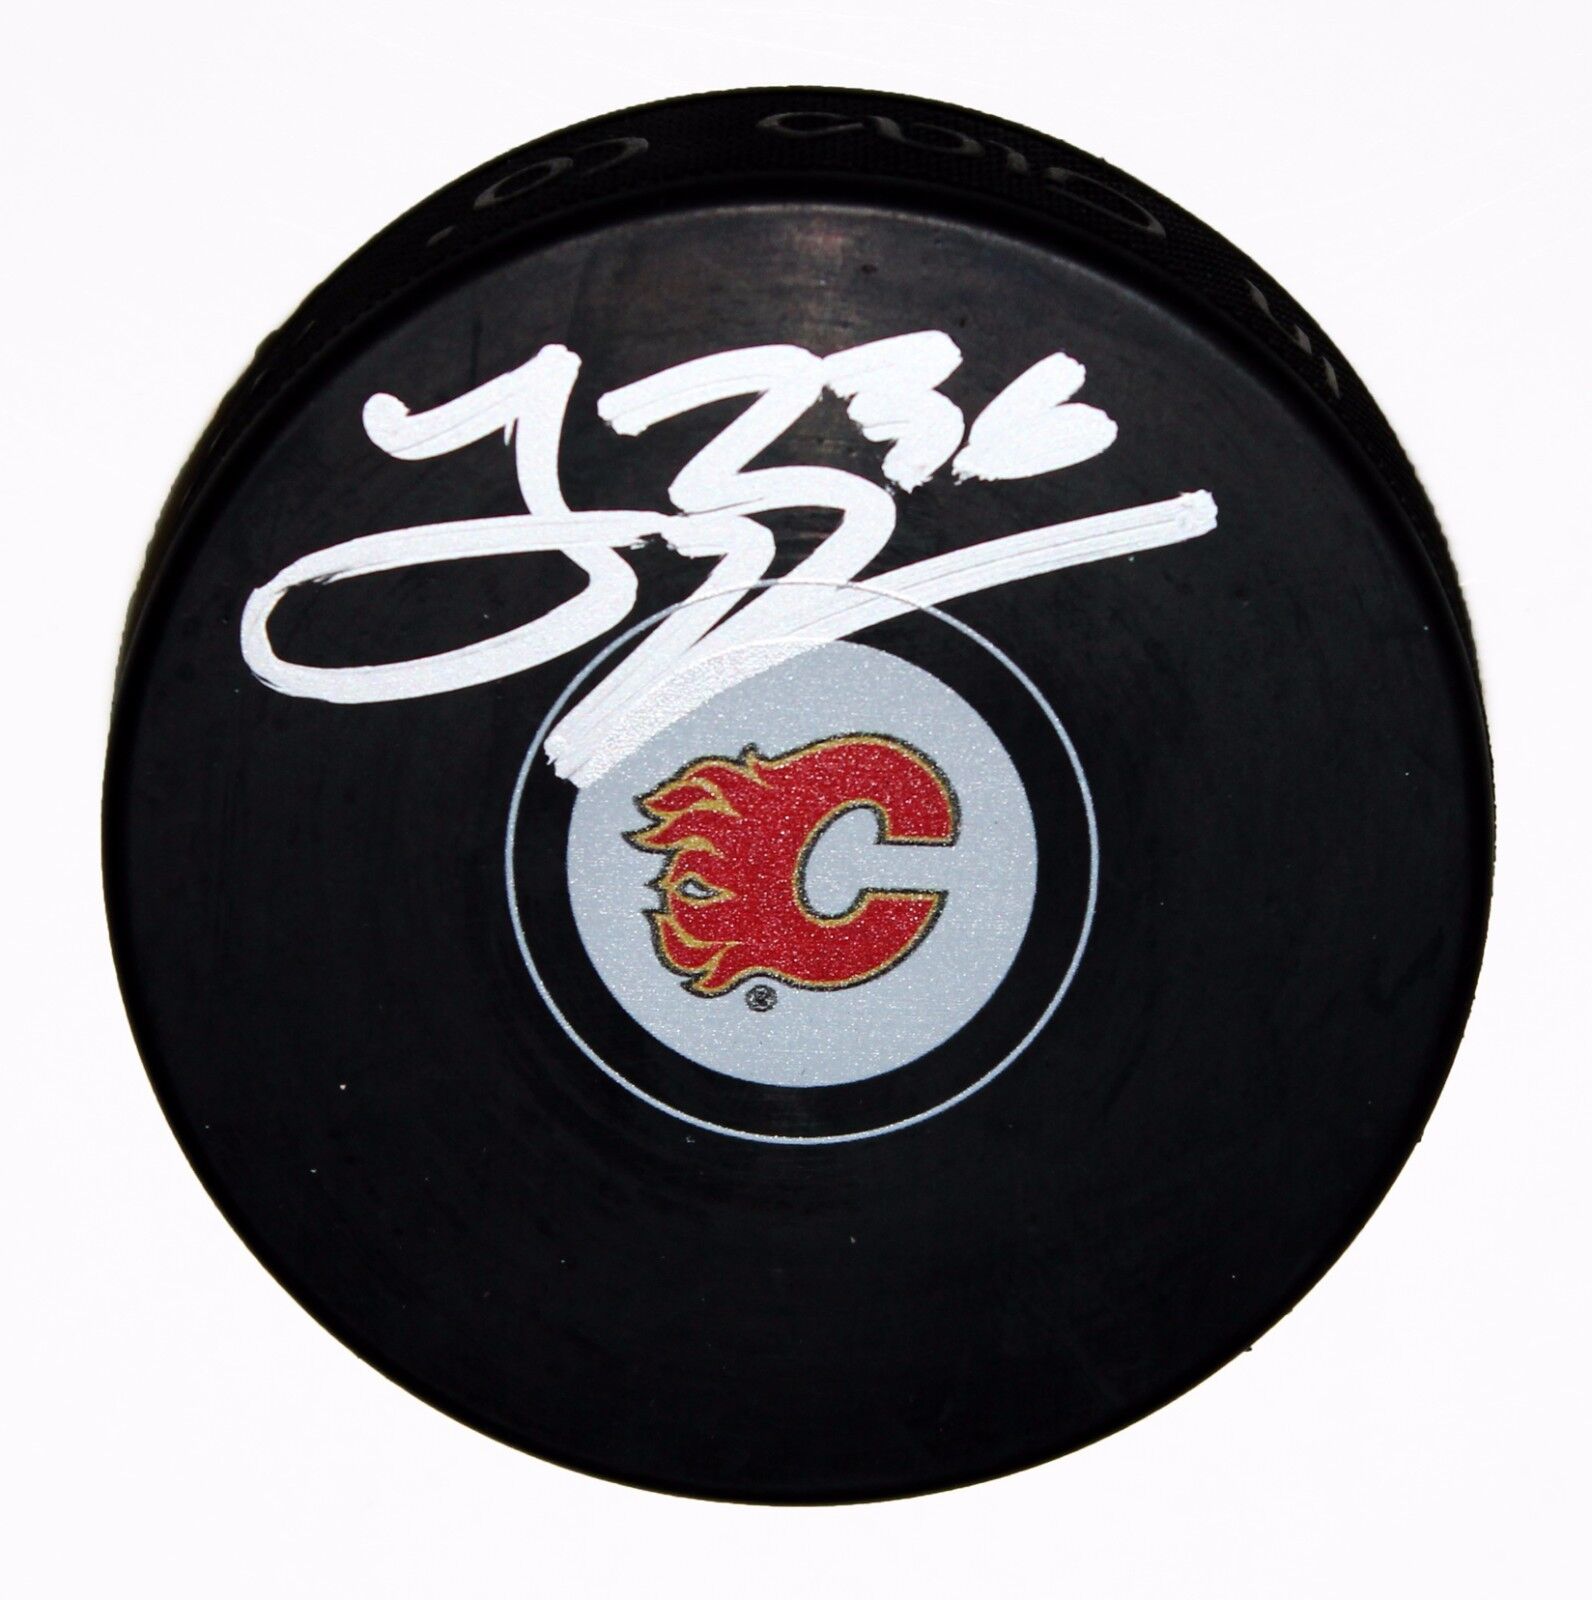 TROY BROUWER SIGNED CALGARY FLAMES Puck NHL STAR HOCKEY AUTOGRAPHED +COA